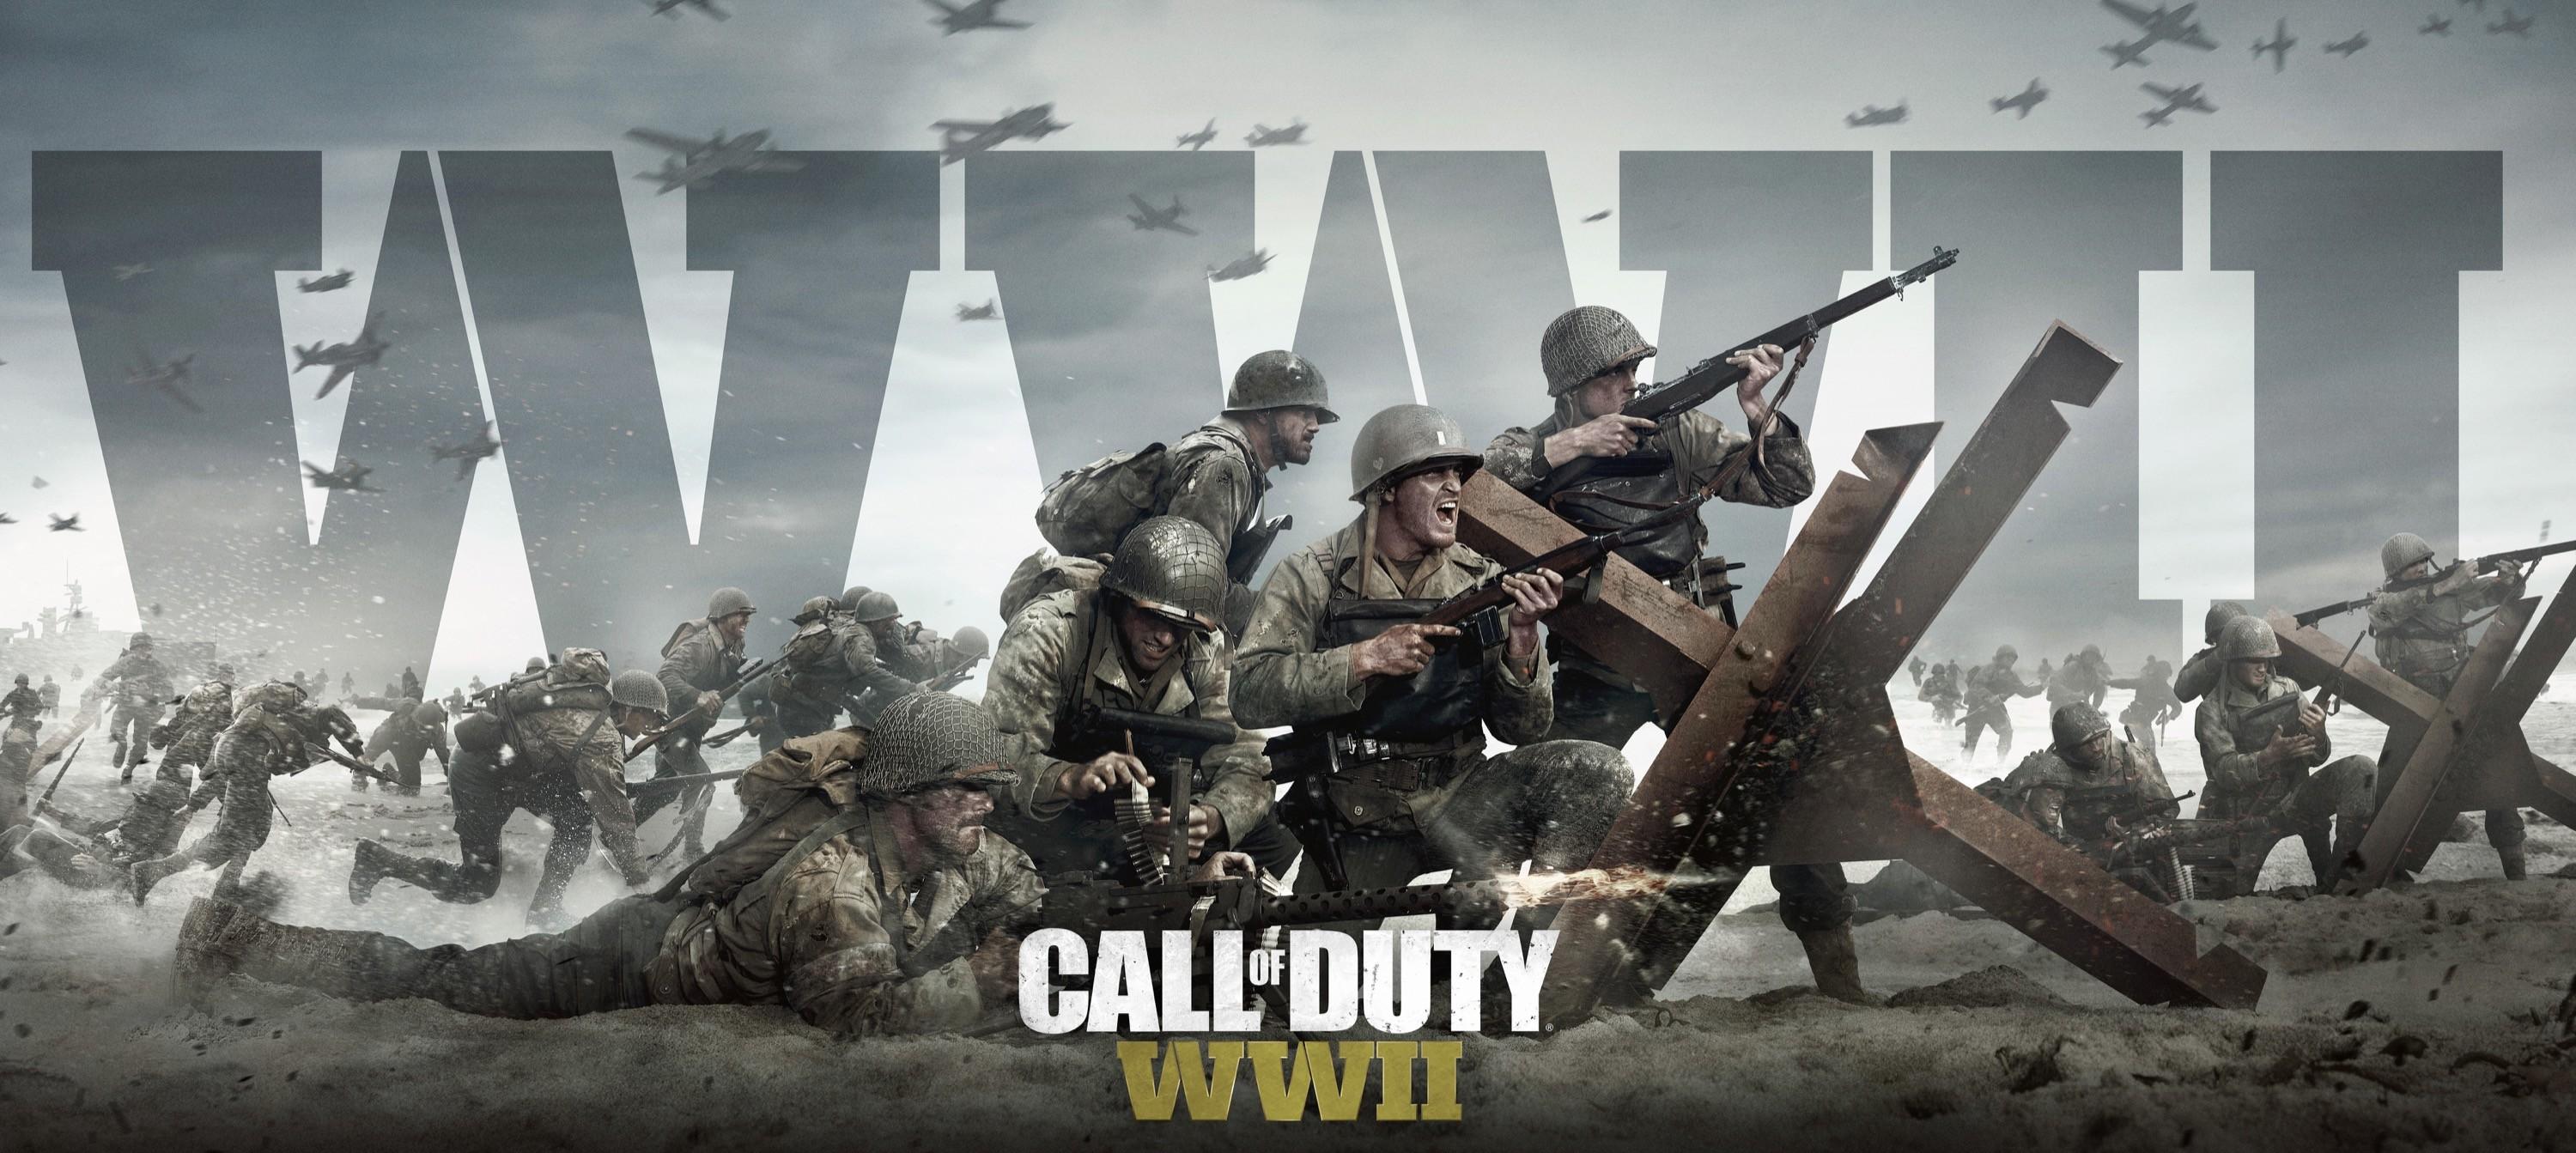 Ww2 Wallpaper background picture